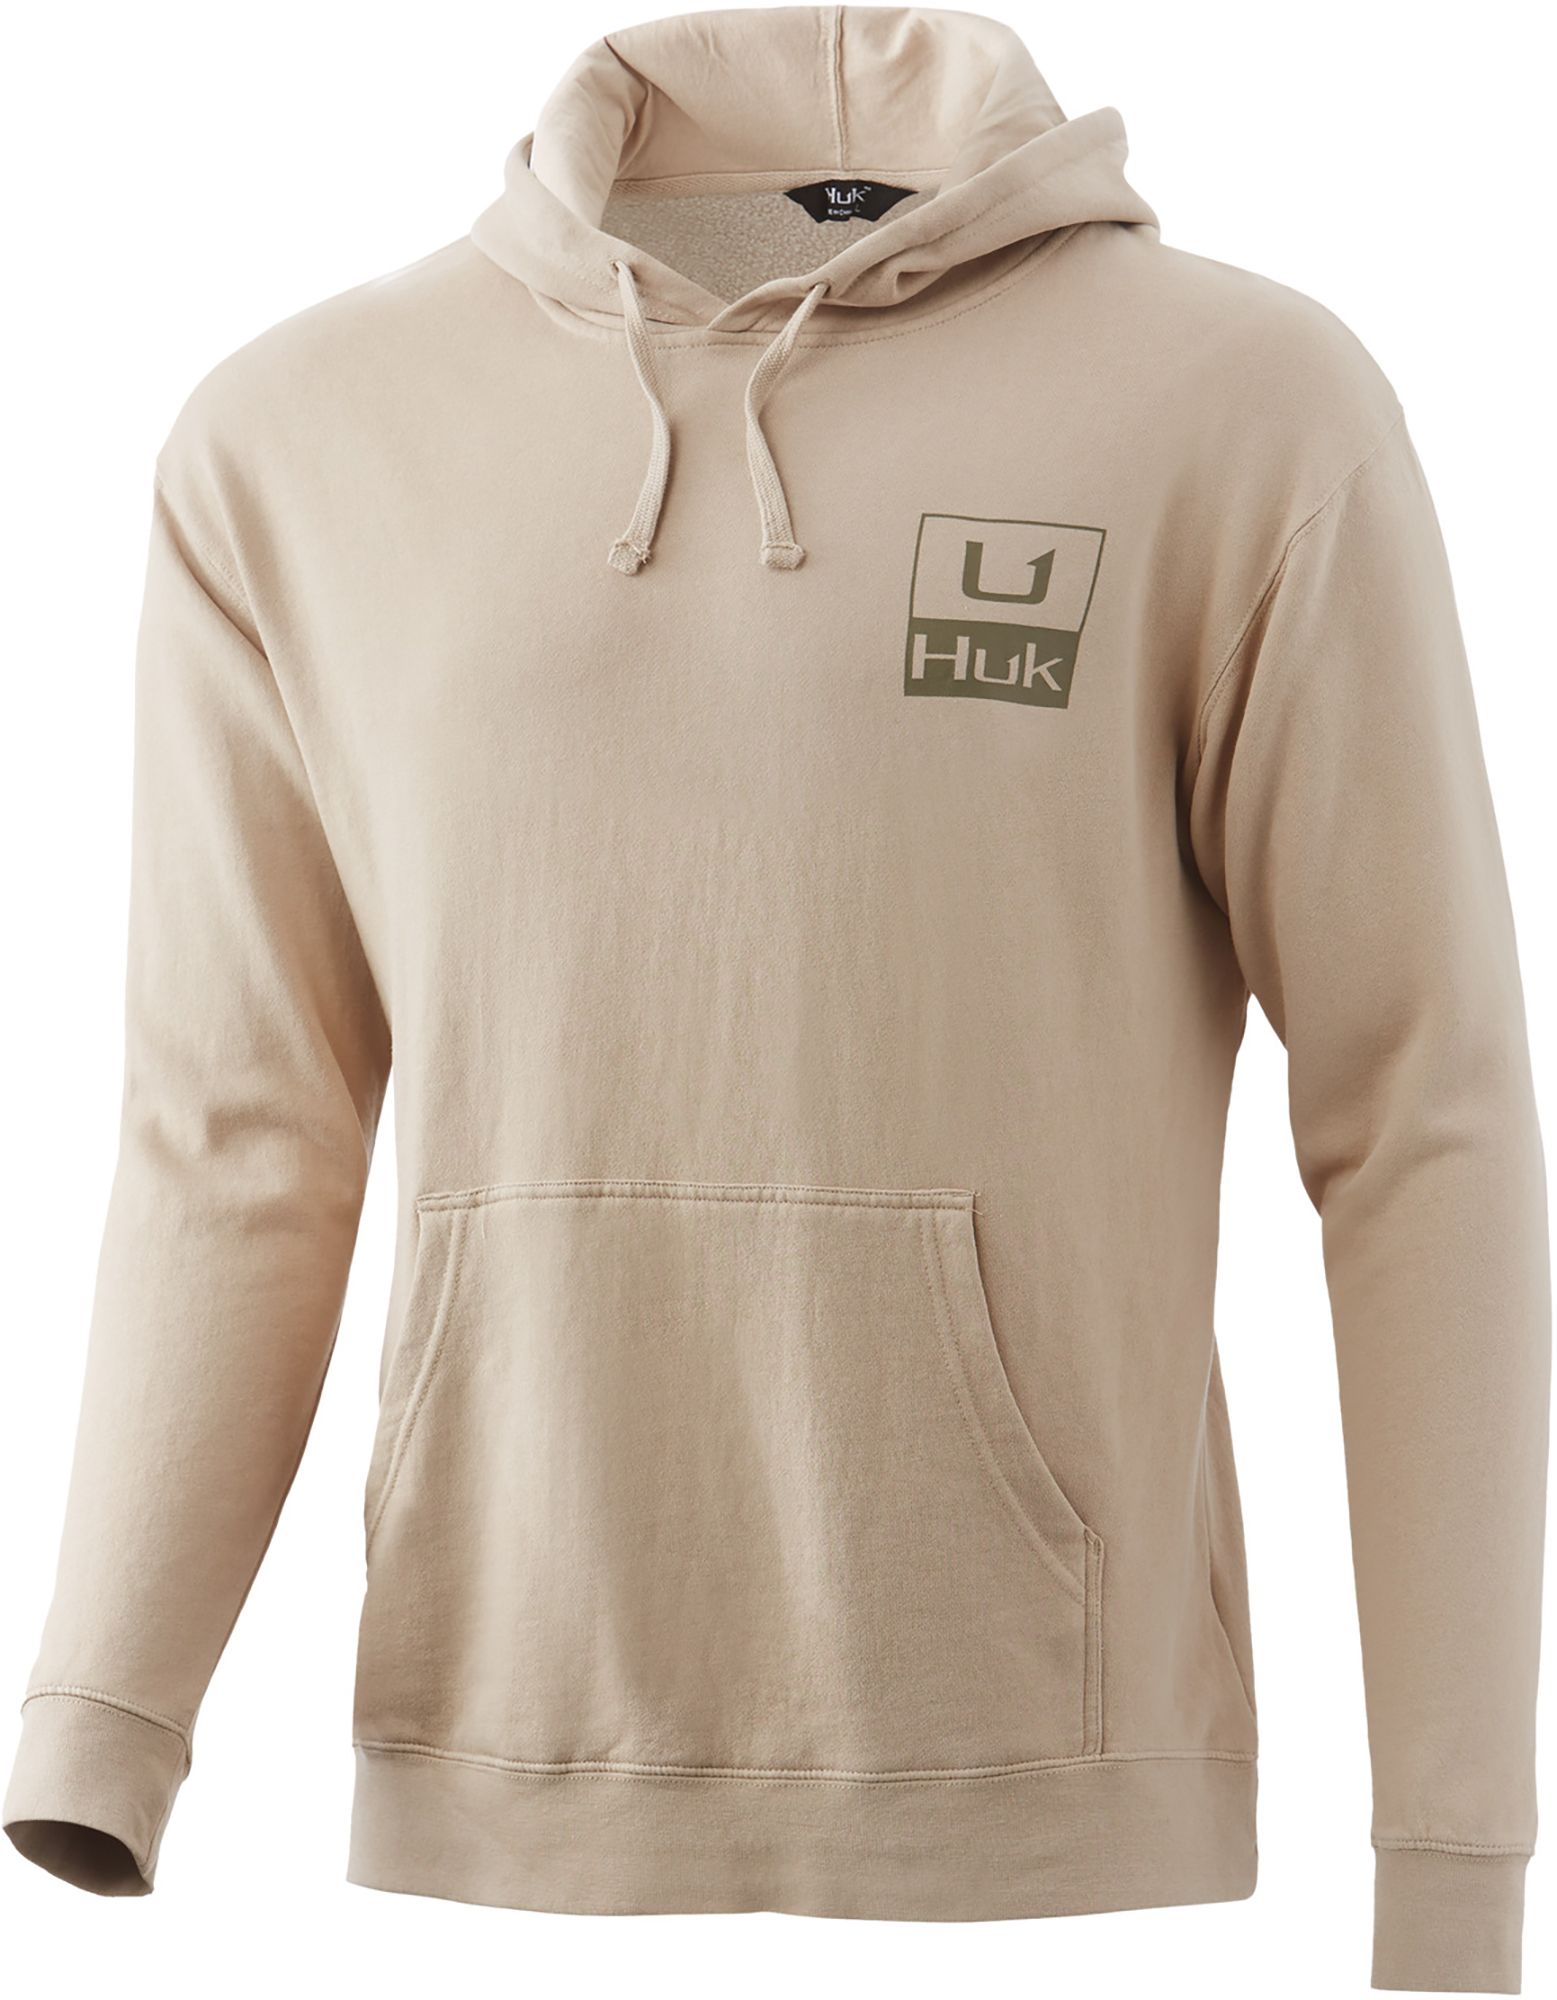 huk pullover hoodie Off 63%